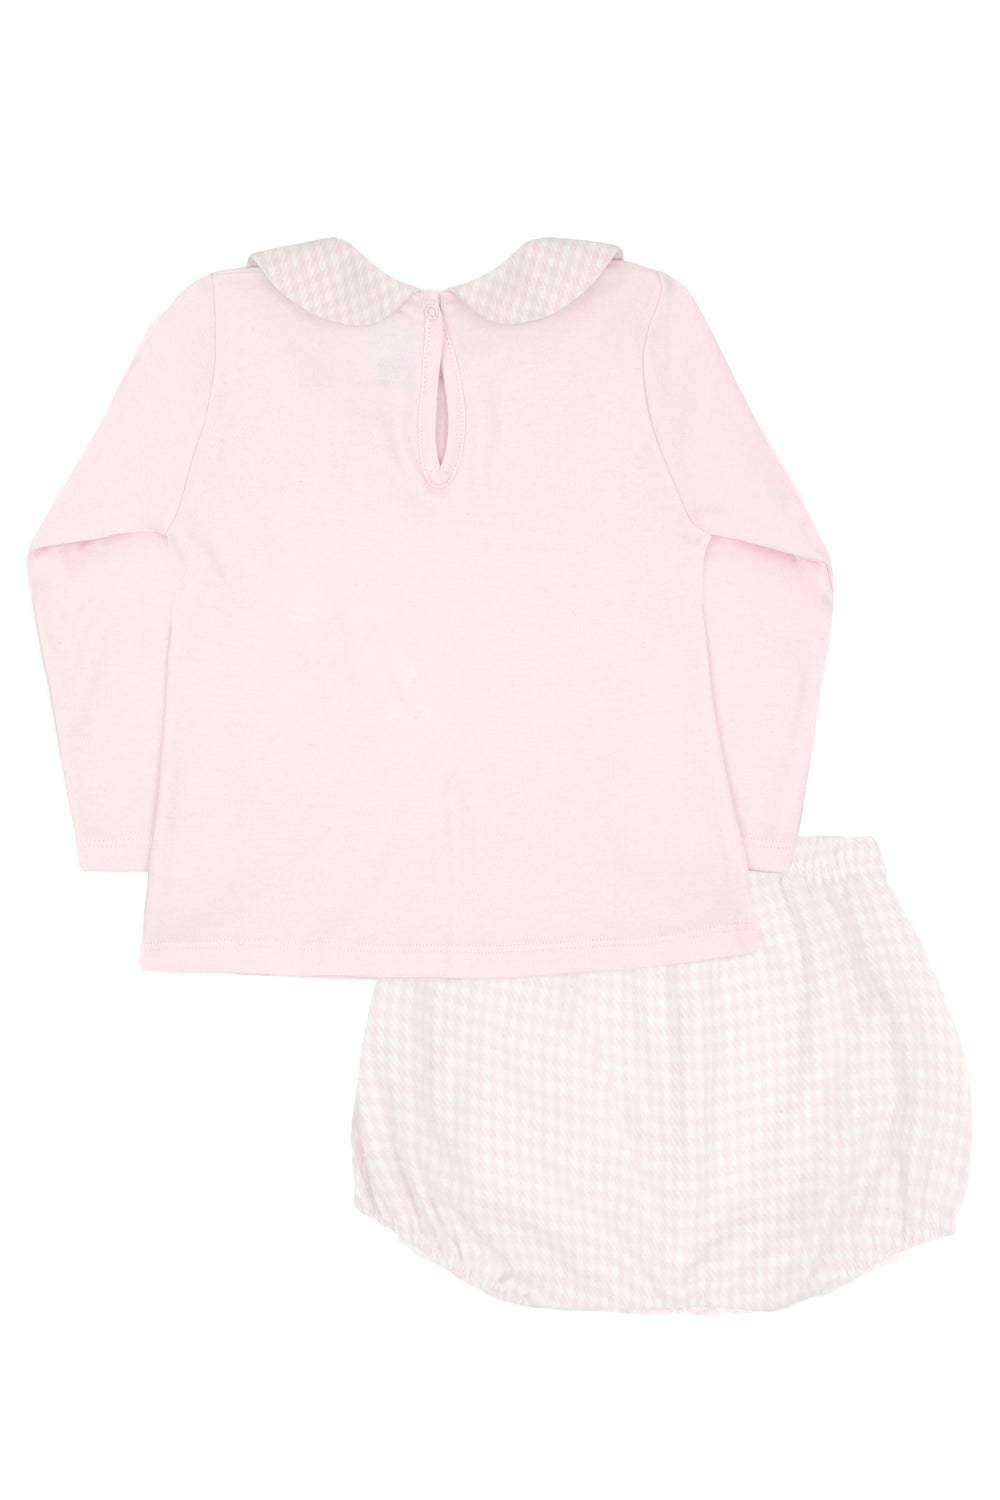 Rapife "Adalira" Pink Houndstooth Top & Bloomers | Millie and John